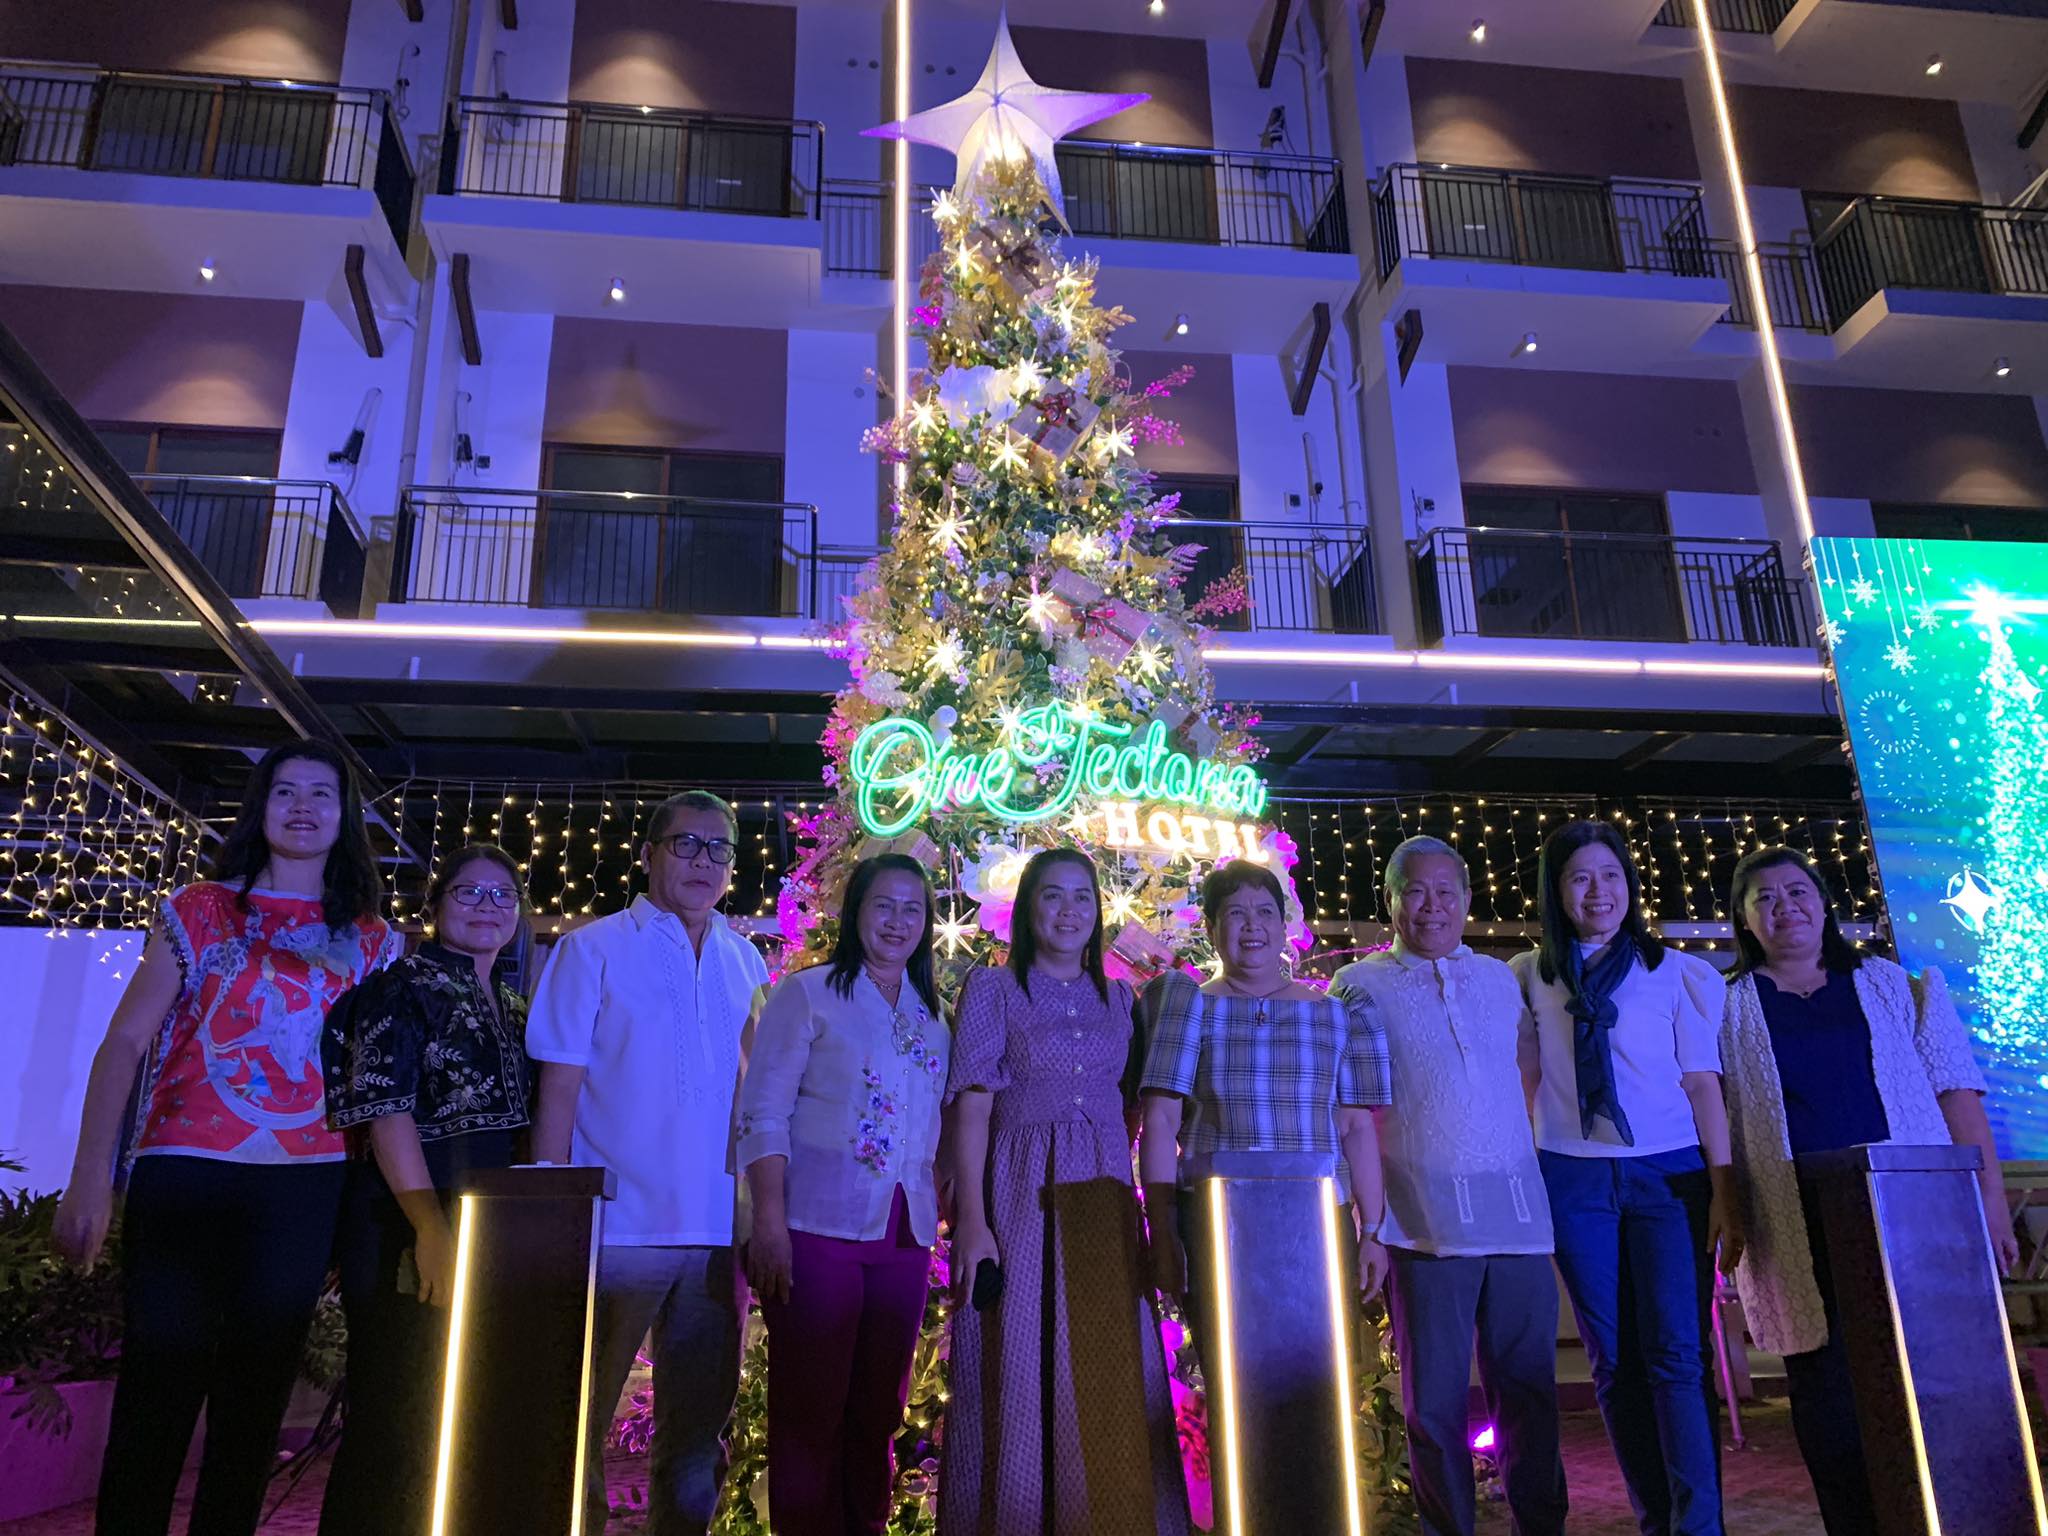 One Tectona Hotel Shines Bright with First Christmas Tree Lighting Ceremony